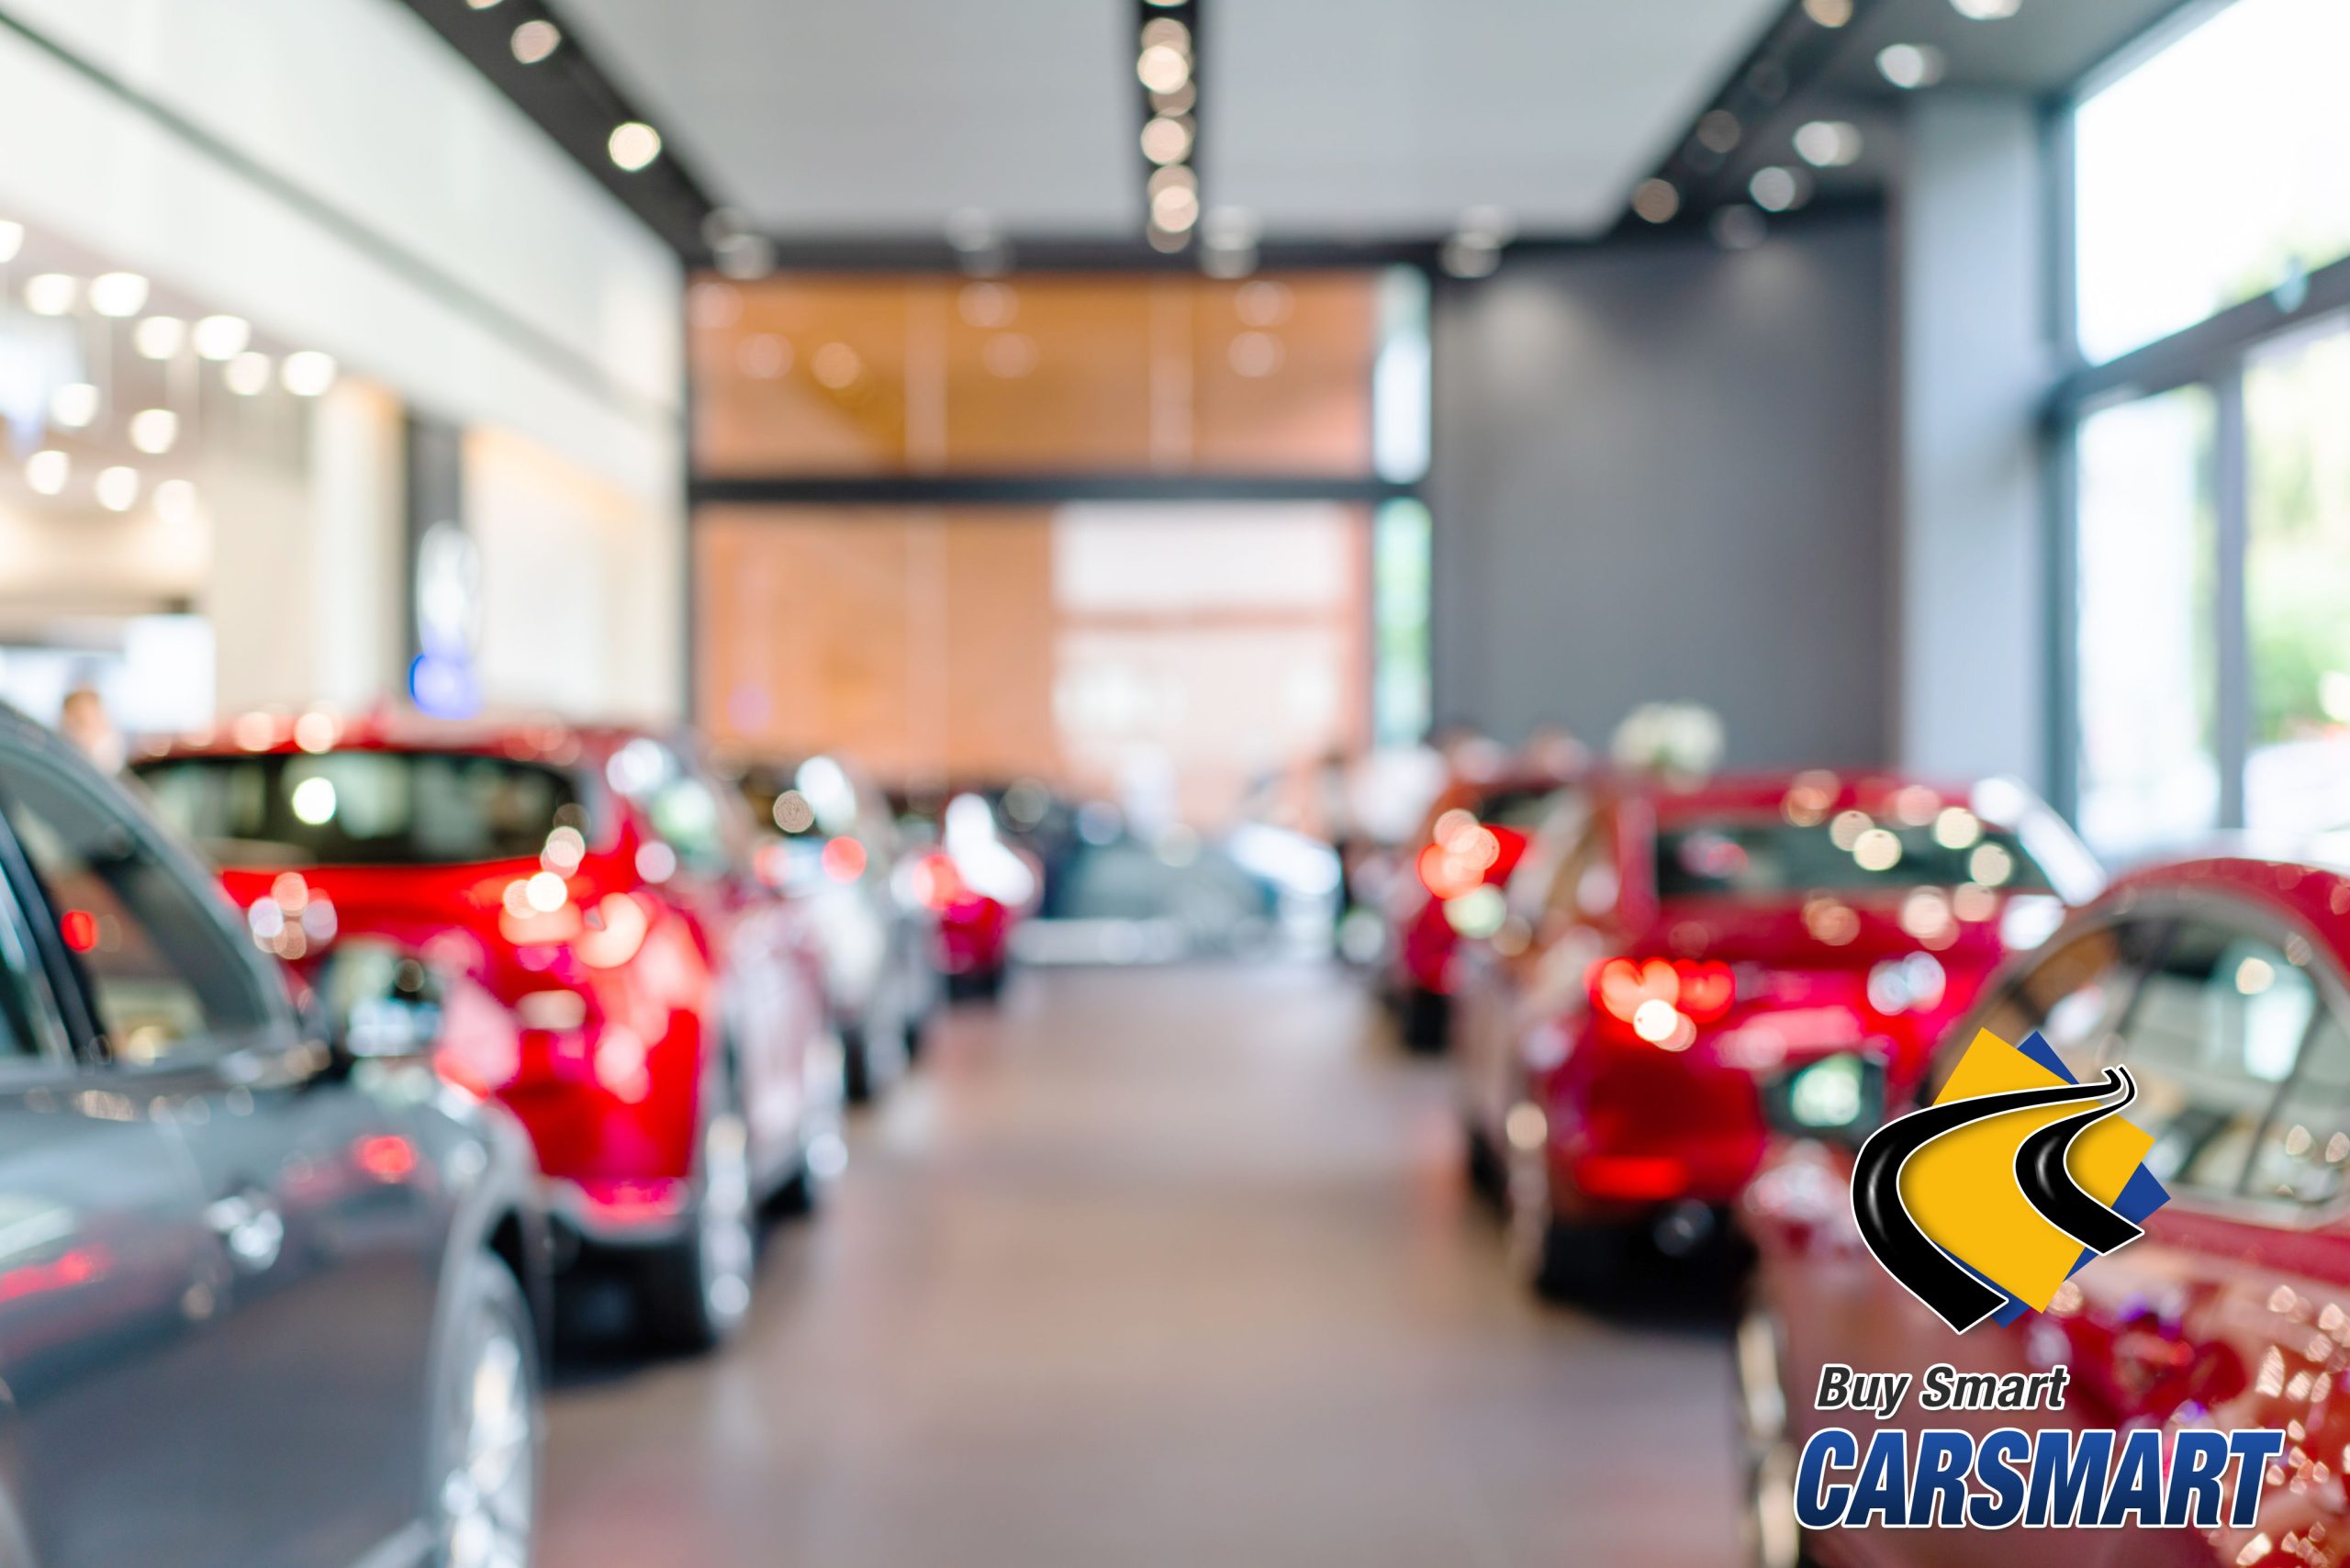 Buy Smart with CarSmart…the Auto Dealer Near Hybla Valley You Can Trust